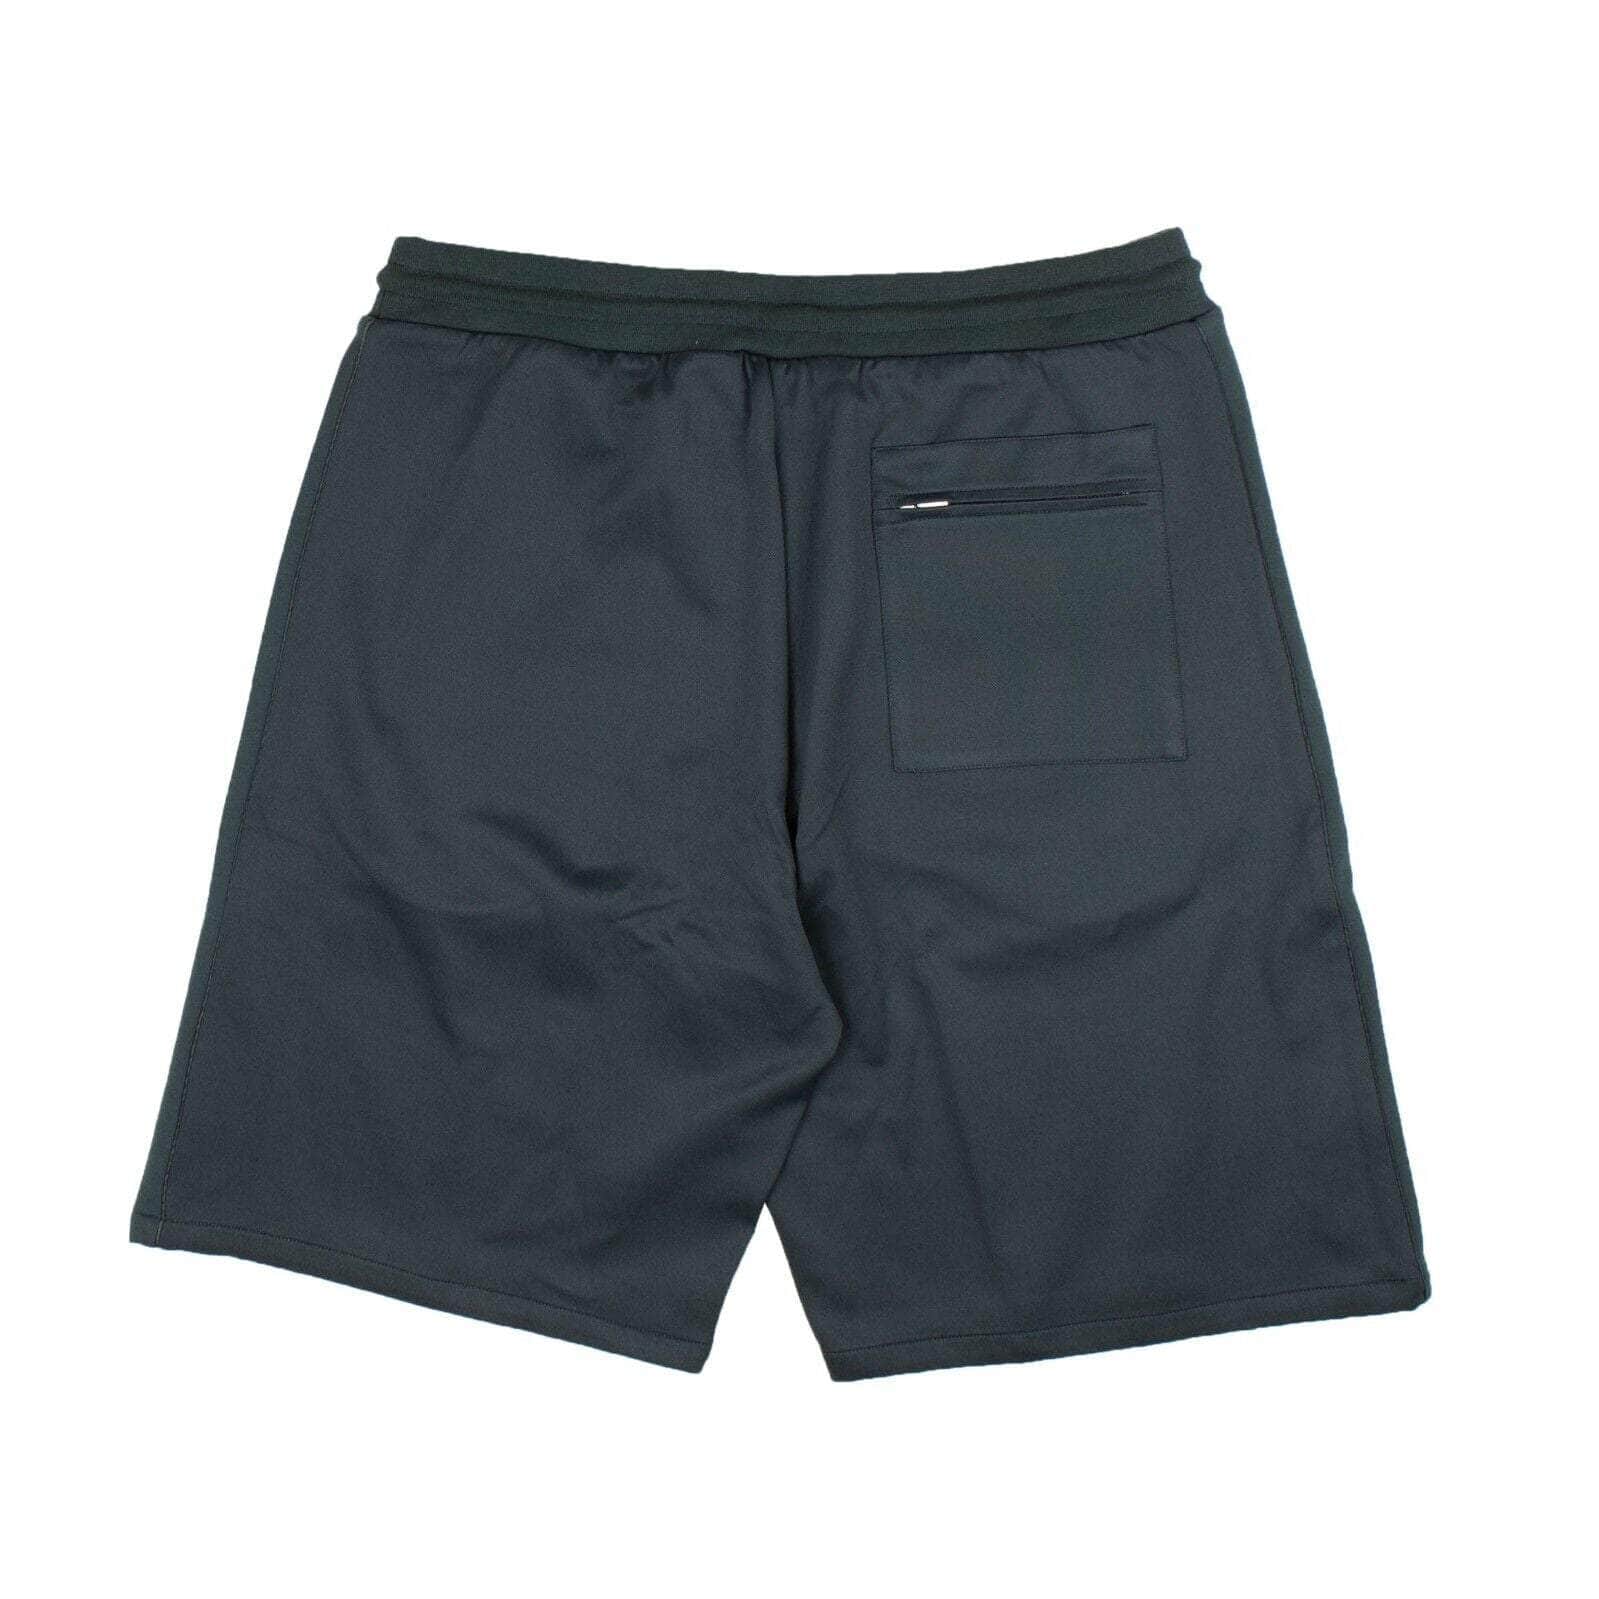 Dior 500-750, channelenable-all, chicmi, couponcollection, gender-mens, main-clothing, mens-shoes, size-m, size-s, size-xs S / 95-DIR-1074/S Dark Green Track Sweatshorts 95-DIR-1074/S 95-DIR-1074/S